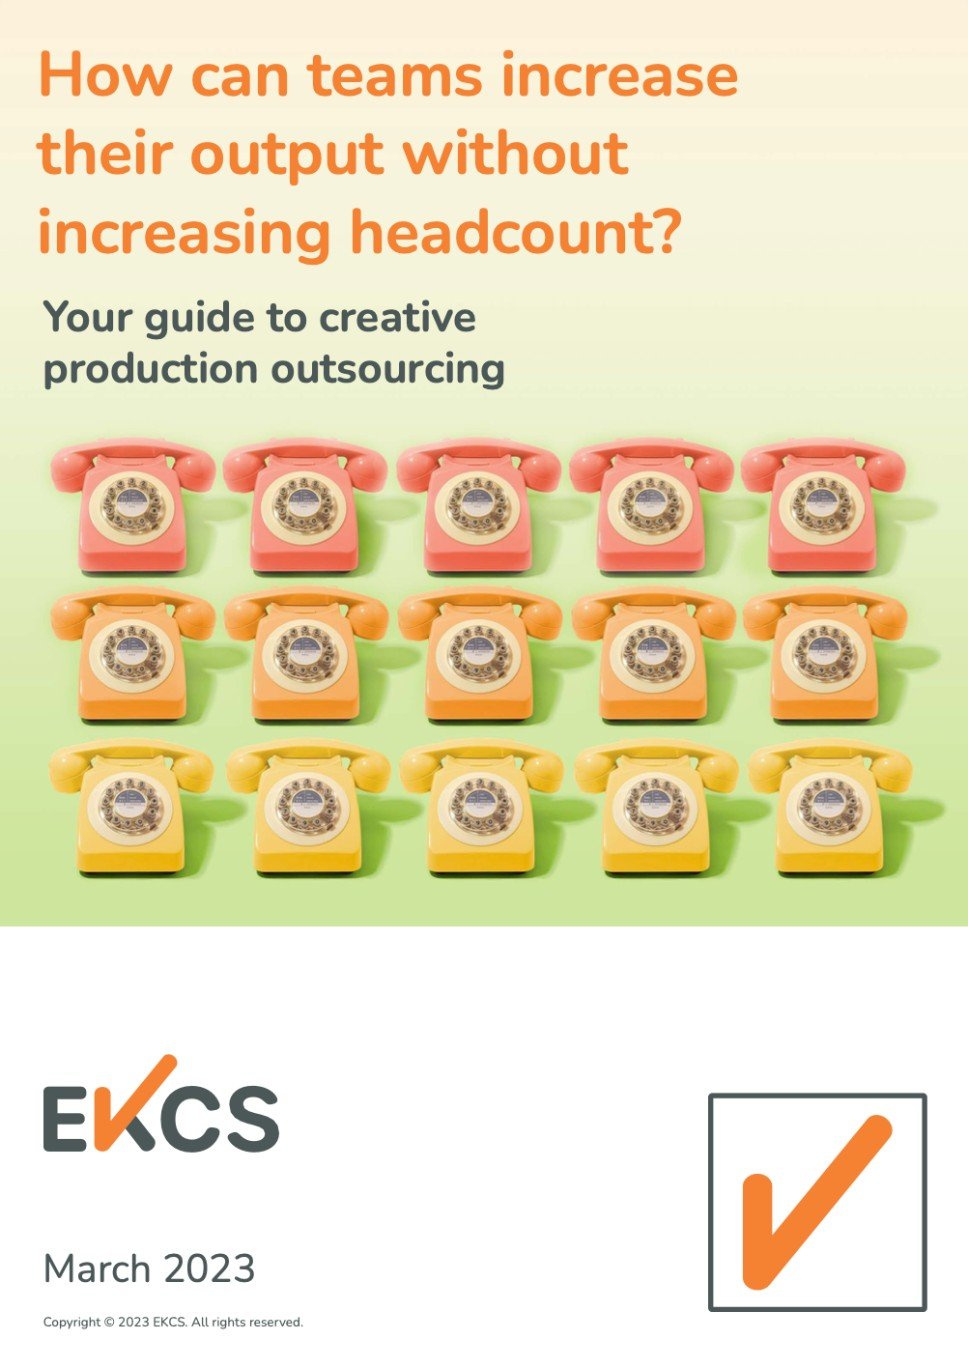 EKCS how can teams increase output March 2023